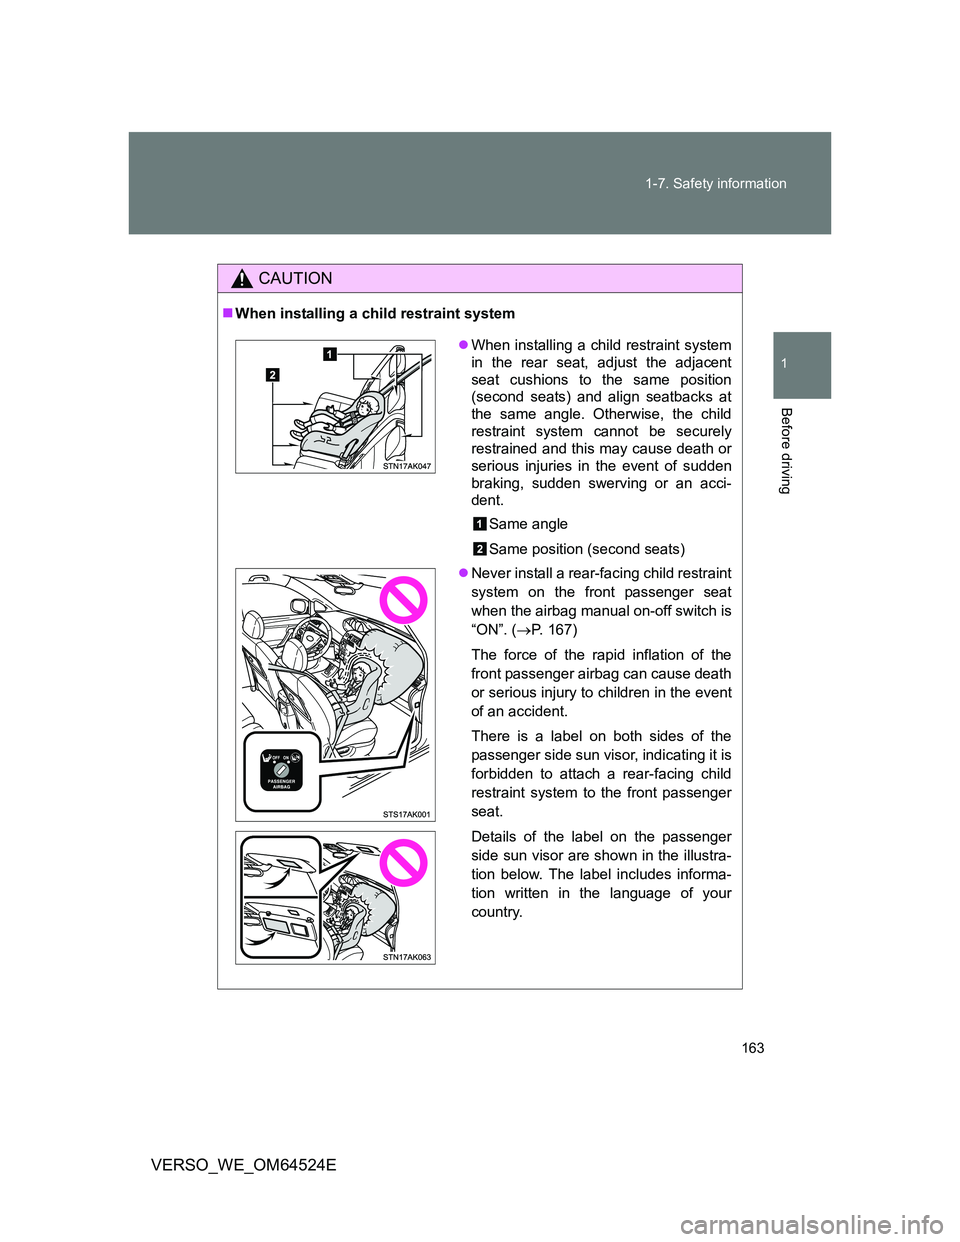 TOYOTA VERSO 2012  Owners Manual 163 1-7. Safety information
1
Before driving
VERSO_WE_OM64524E
CAUTION
When installing a child restraint system
When installing a child restraint system
in the rear seat, adjust the adjacent
sea